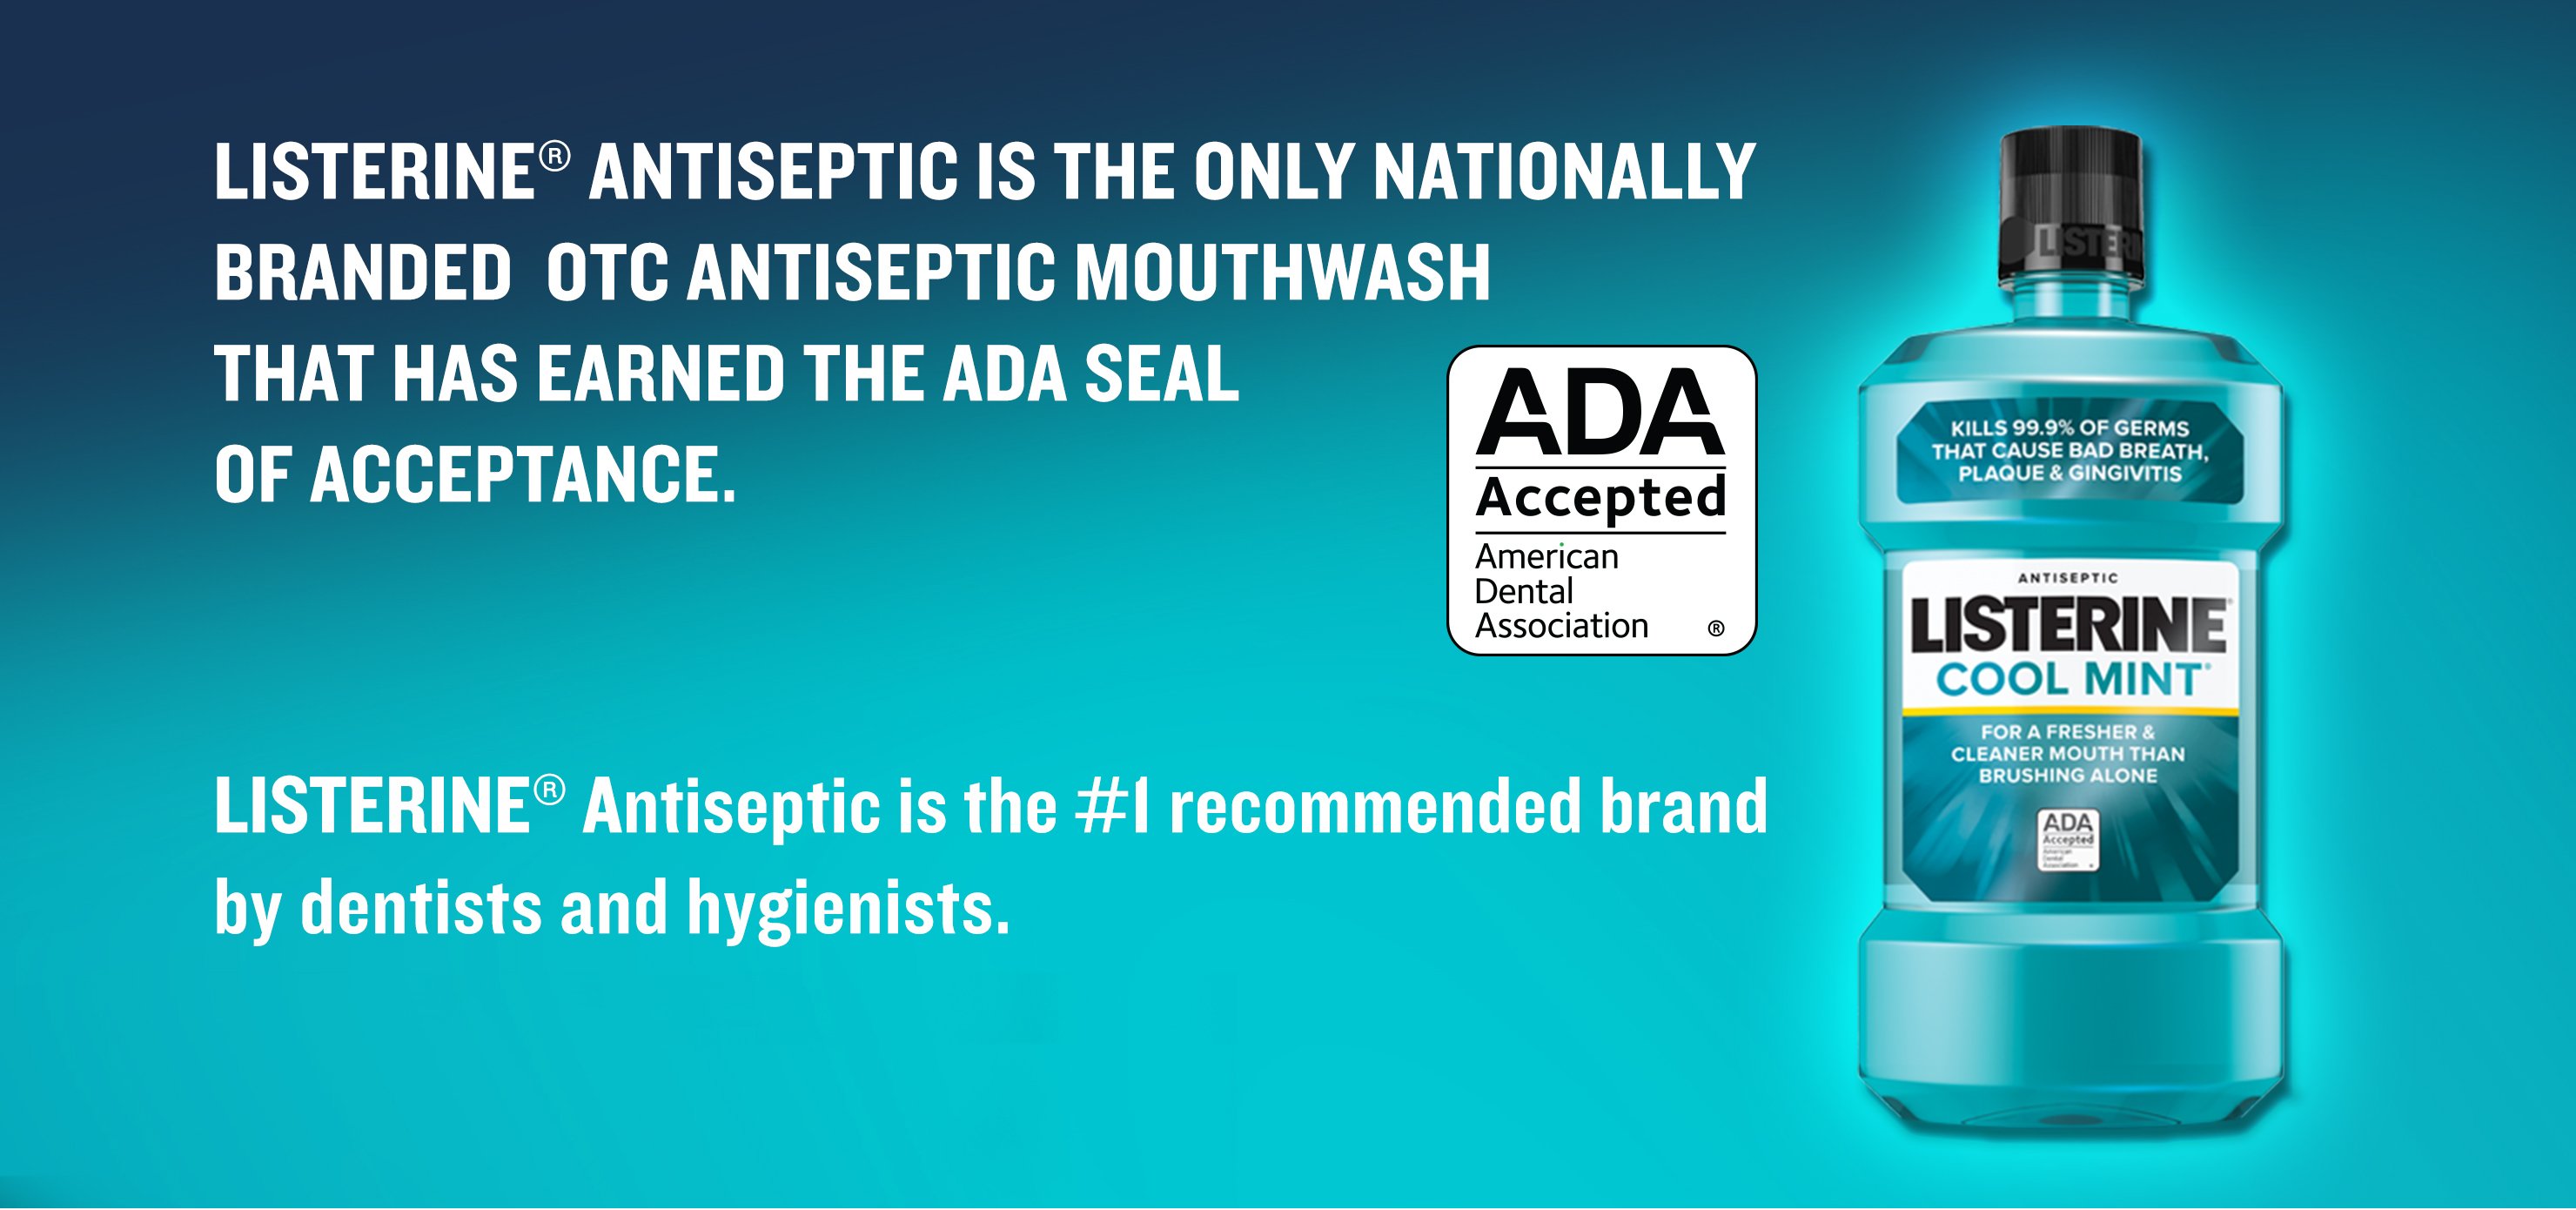 Listerine Antiseptic is the only nationally branded OTC antiseptic mouthwash that has earned the ADA seal of acceptance, and it's the #1 recommended brand by dentists and hygienists